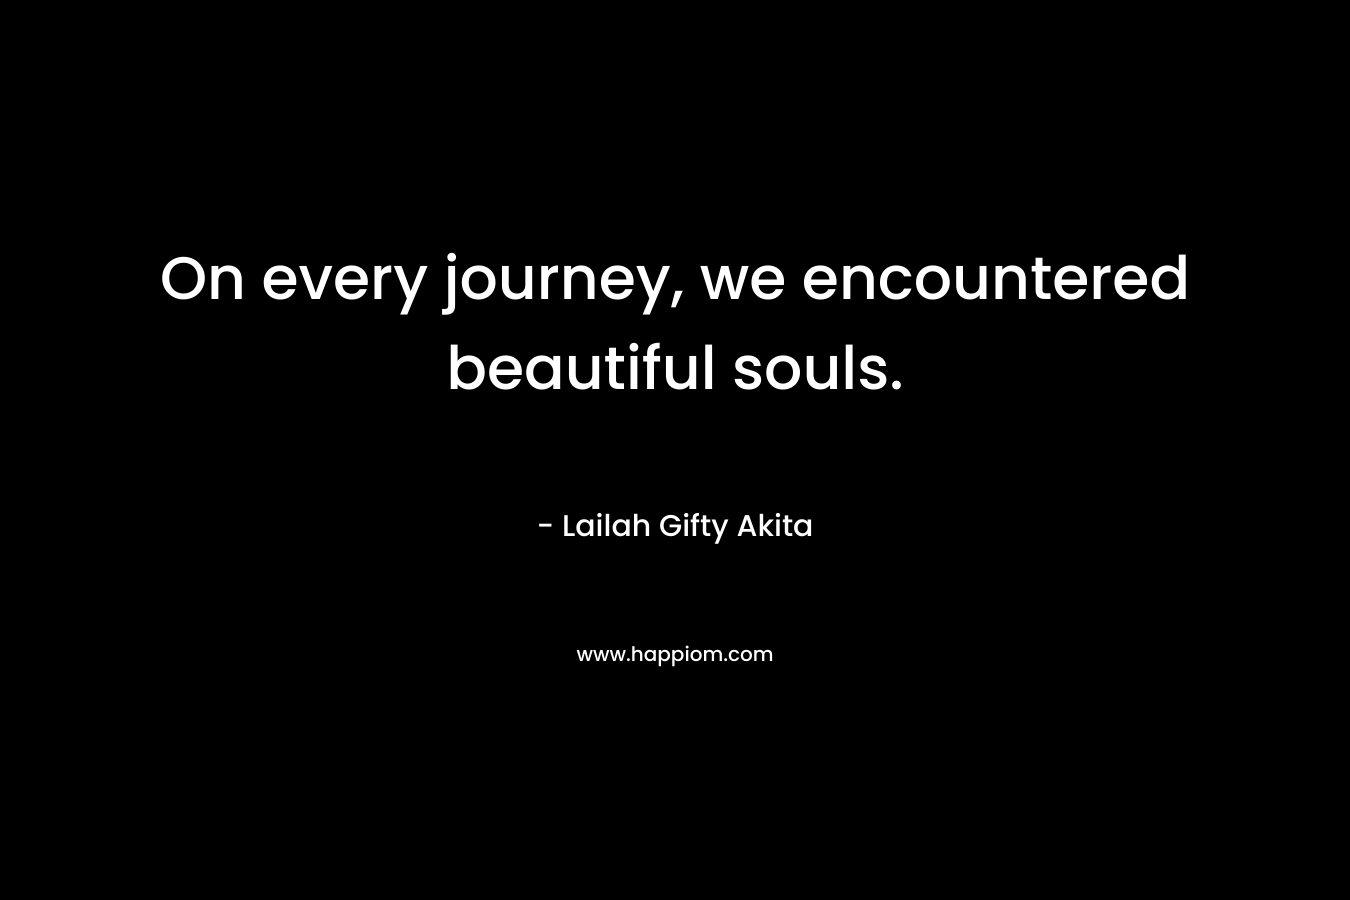 On every journey, we encountered beautiful souls. – Lailah Gifty Akita